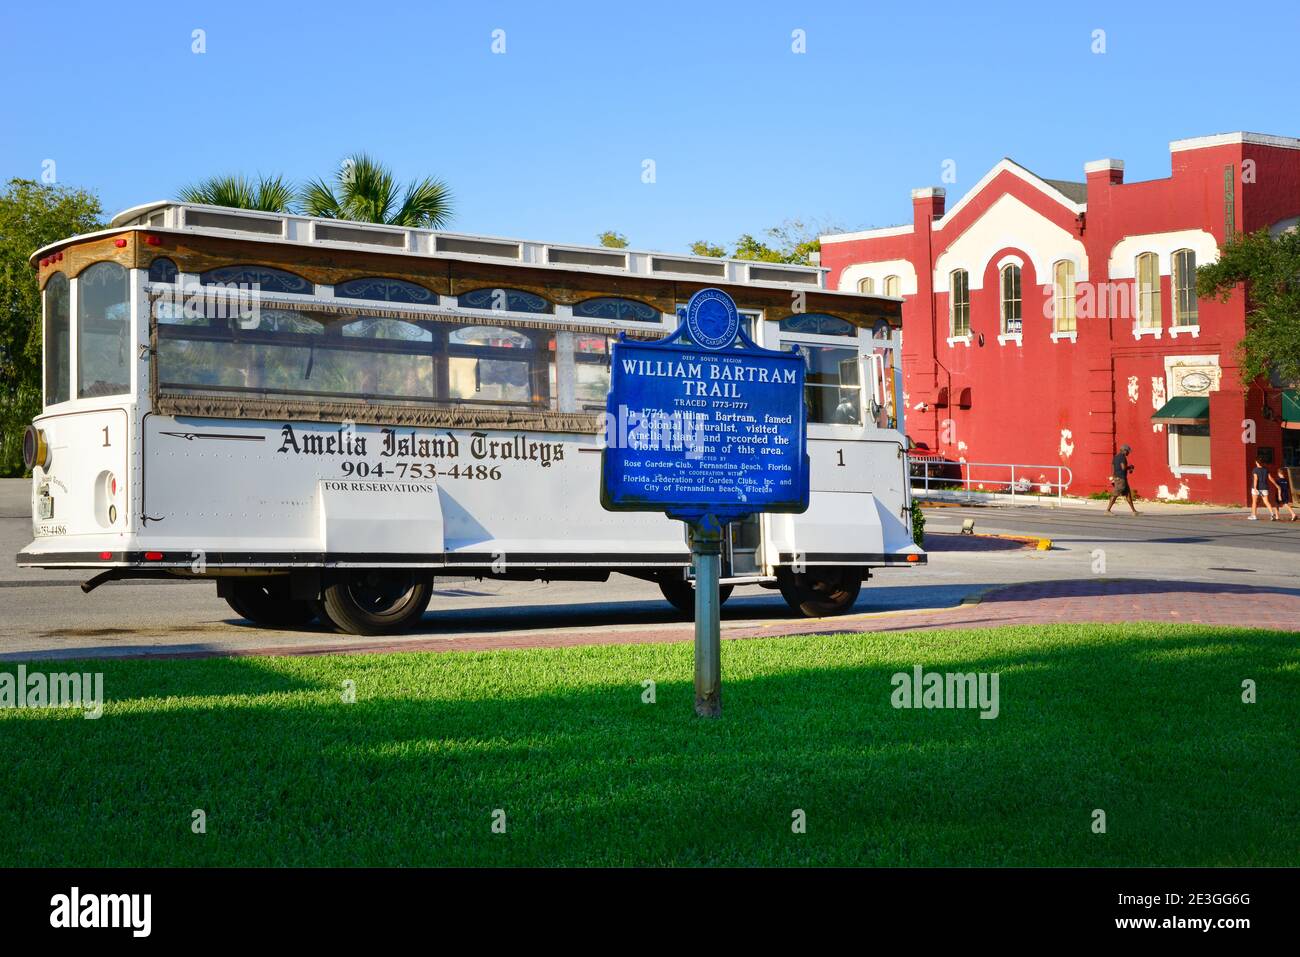 A Vintage tour bus of Amelia Island Trolleys, in historic district of Fernandina Beach, with historical sign for the Naturalist, William Bartram, FL Stock Photo